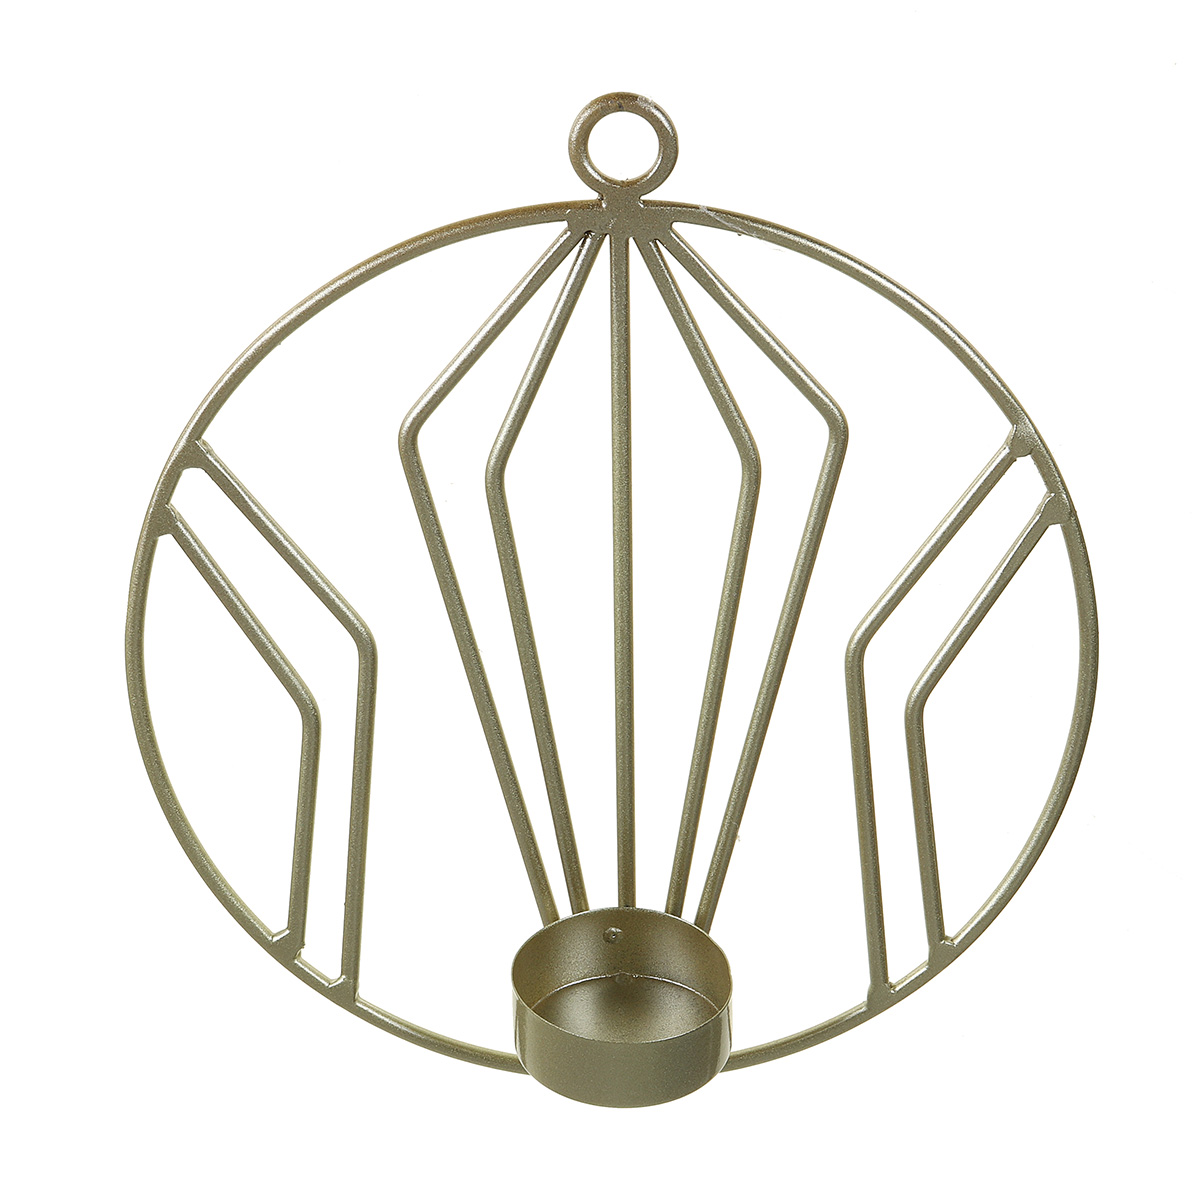 3D-Geometric-Candlestick-Iron-Wall-Candle-Holder-Sconce-Warm-Home-Party-Decor-1727945-15